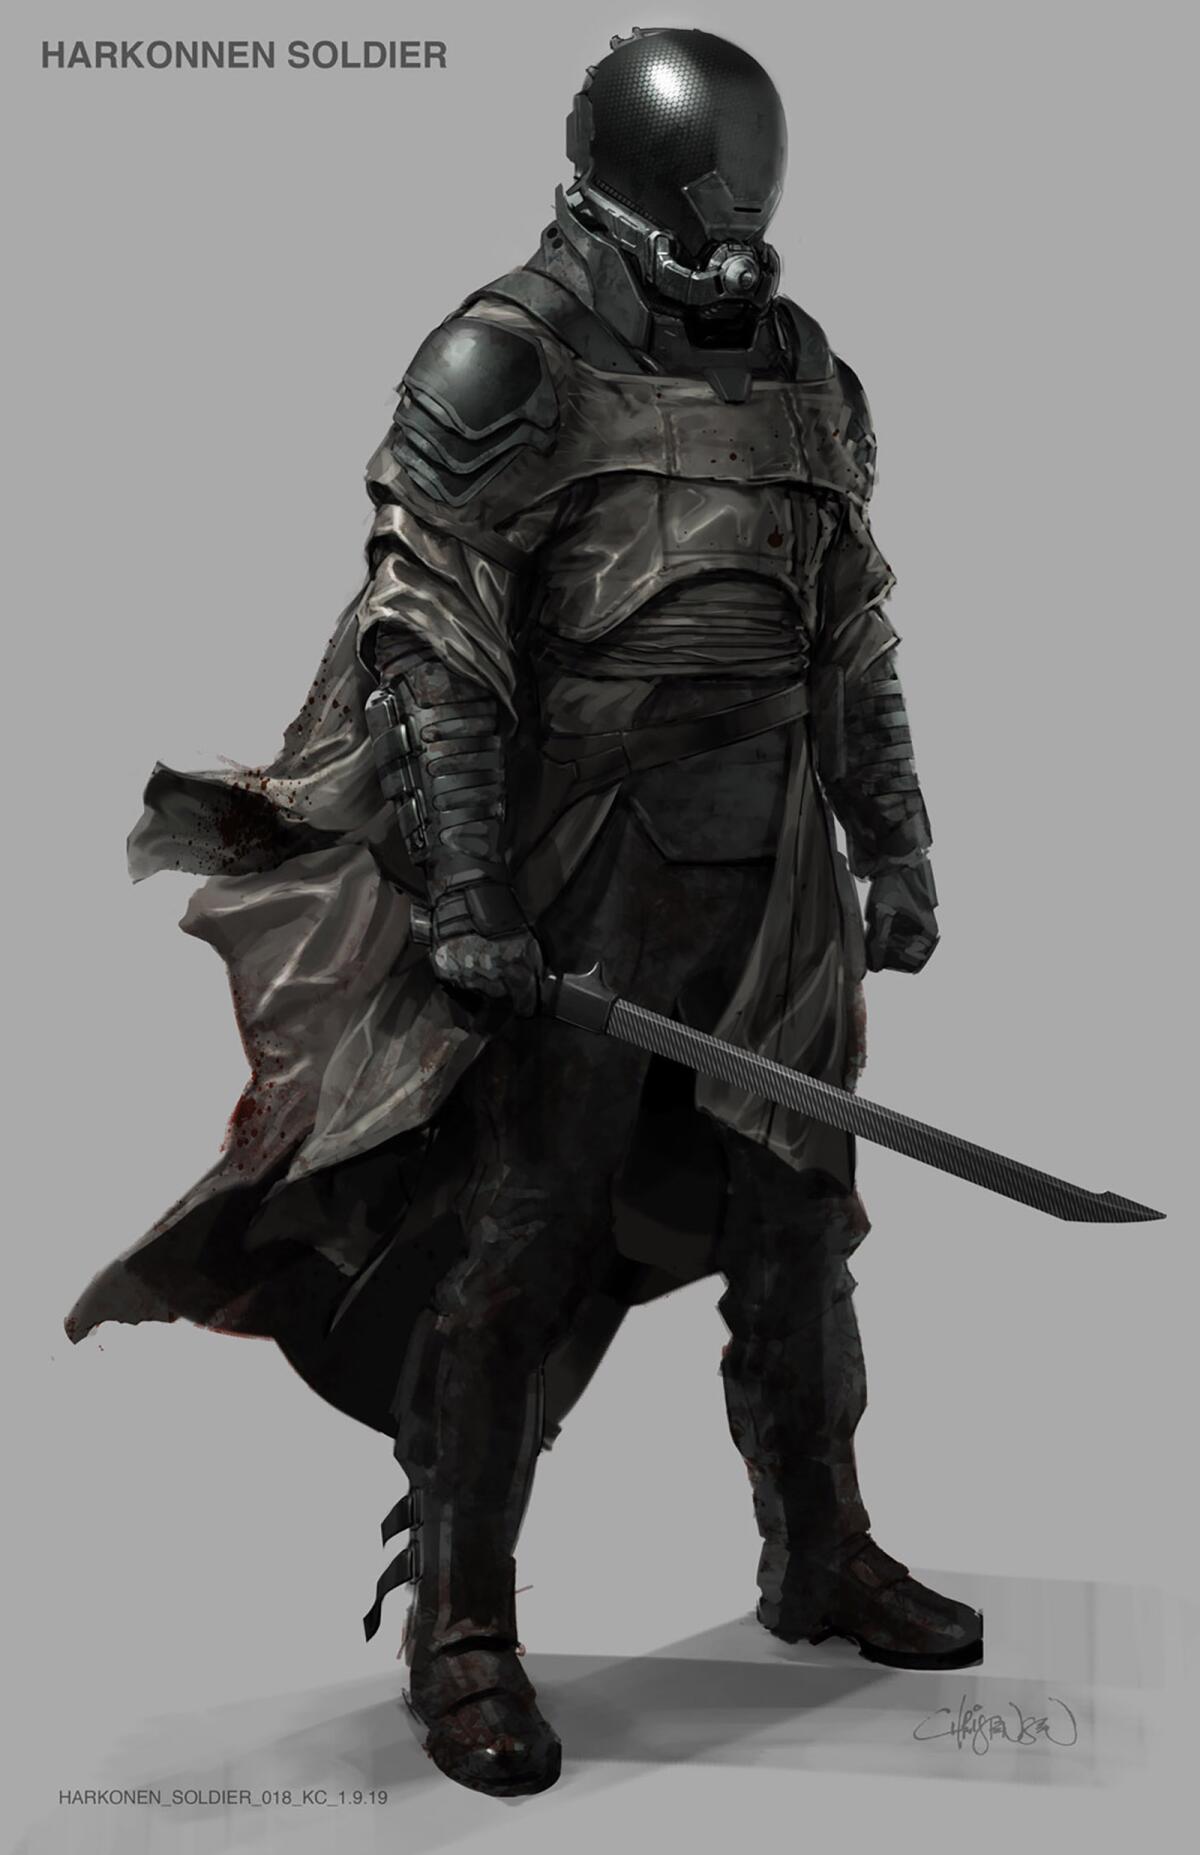 A soldier clad in black, with a smooth helmet and a sword